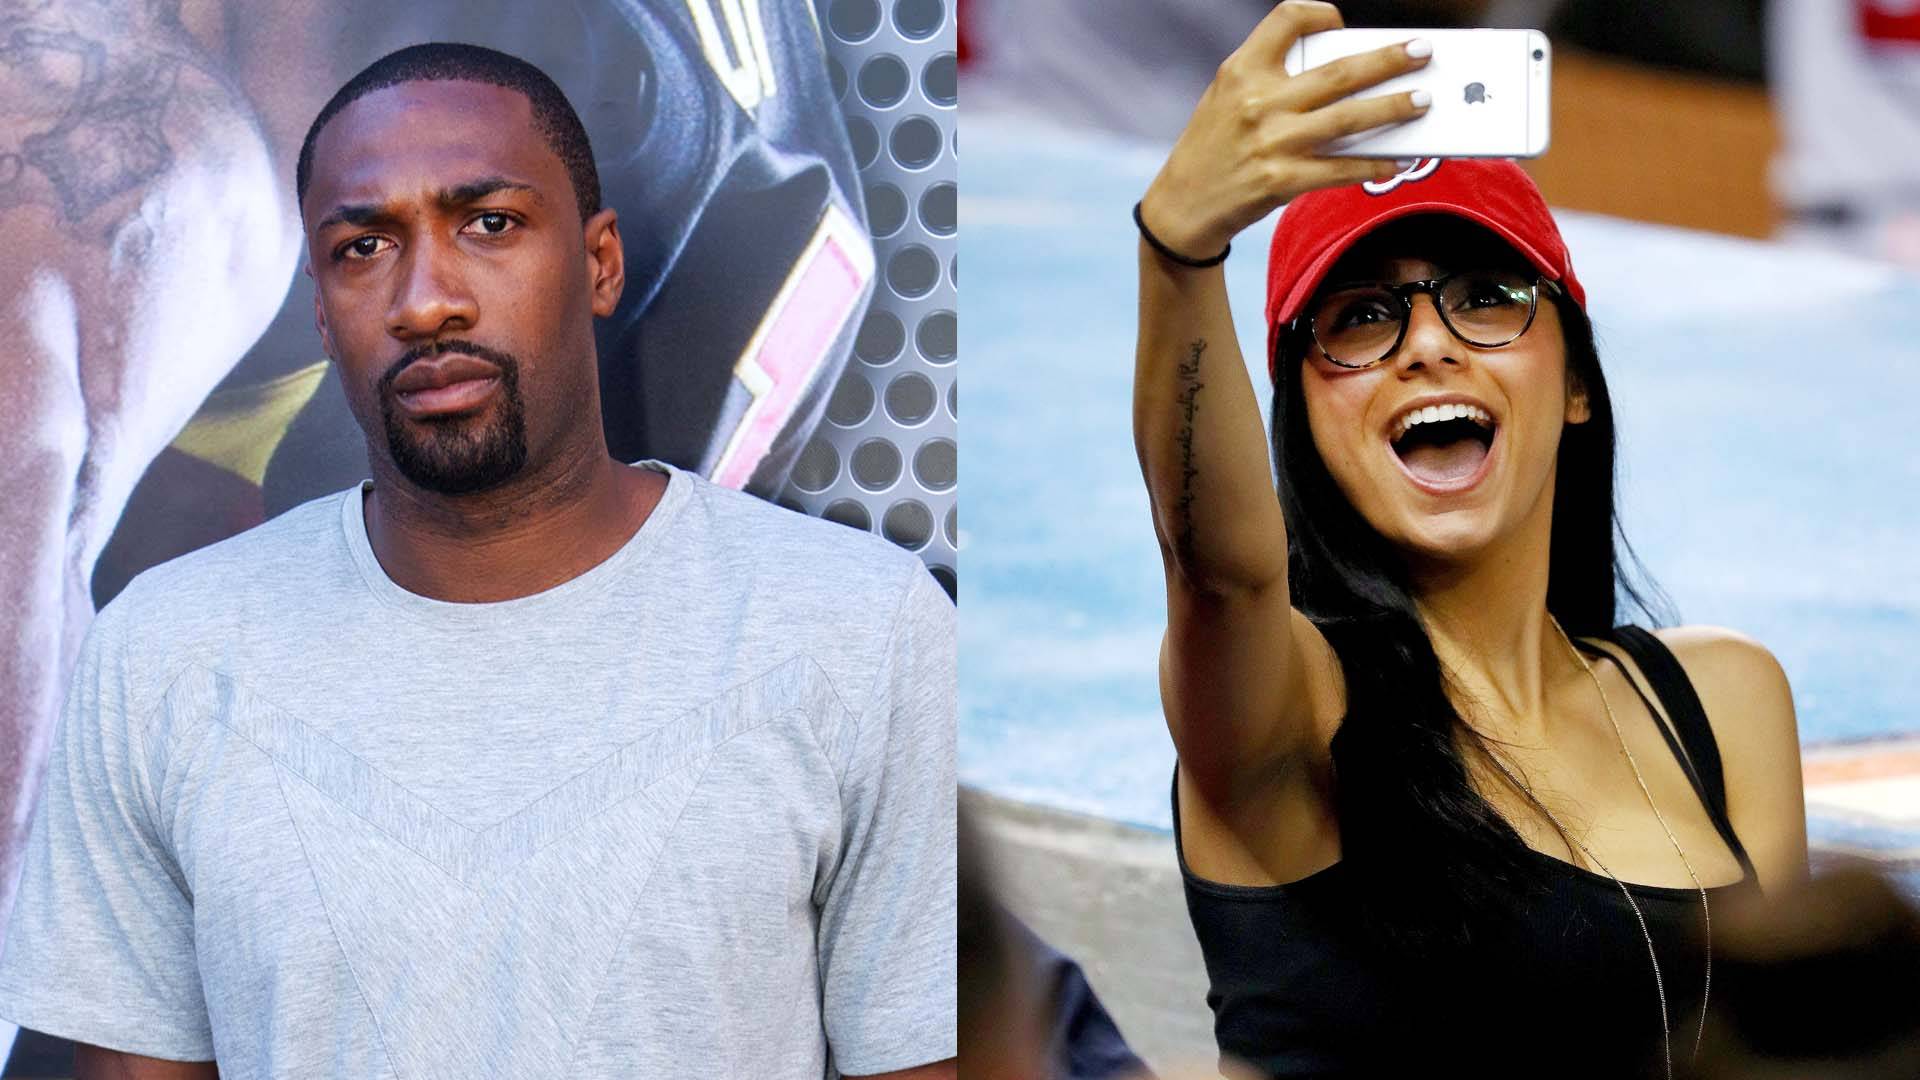 Mike Khalifa Sex Video - Gilbert Arenas Exposed The Hell Out Of Porn Star Mia Khalifa For Trying To  Slide In His DM 'For The D' | News | BET